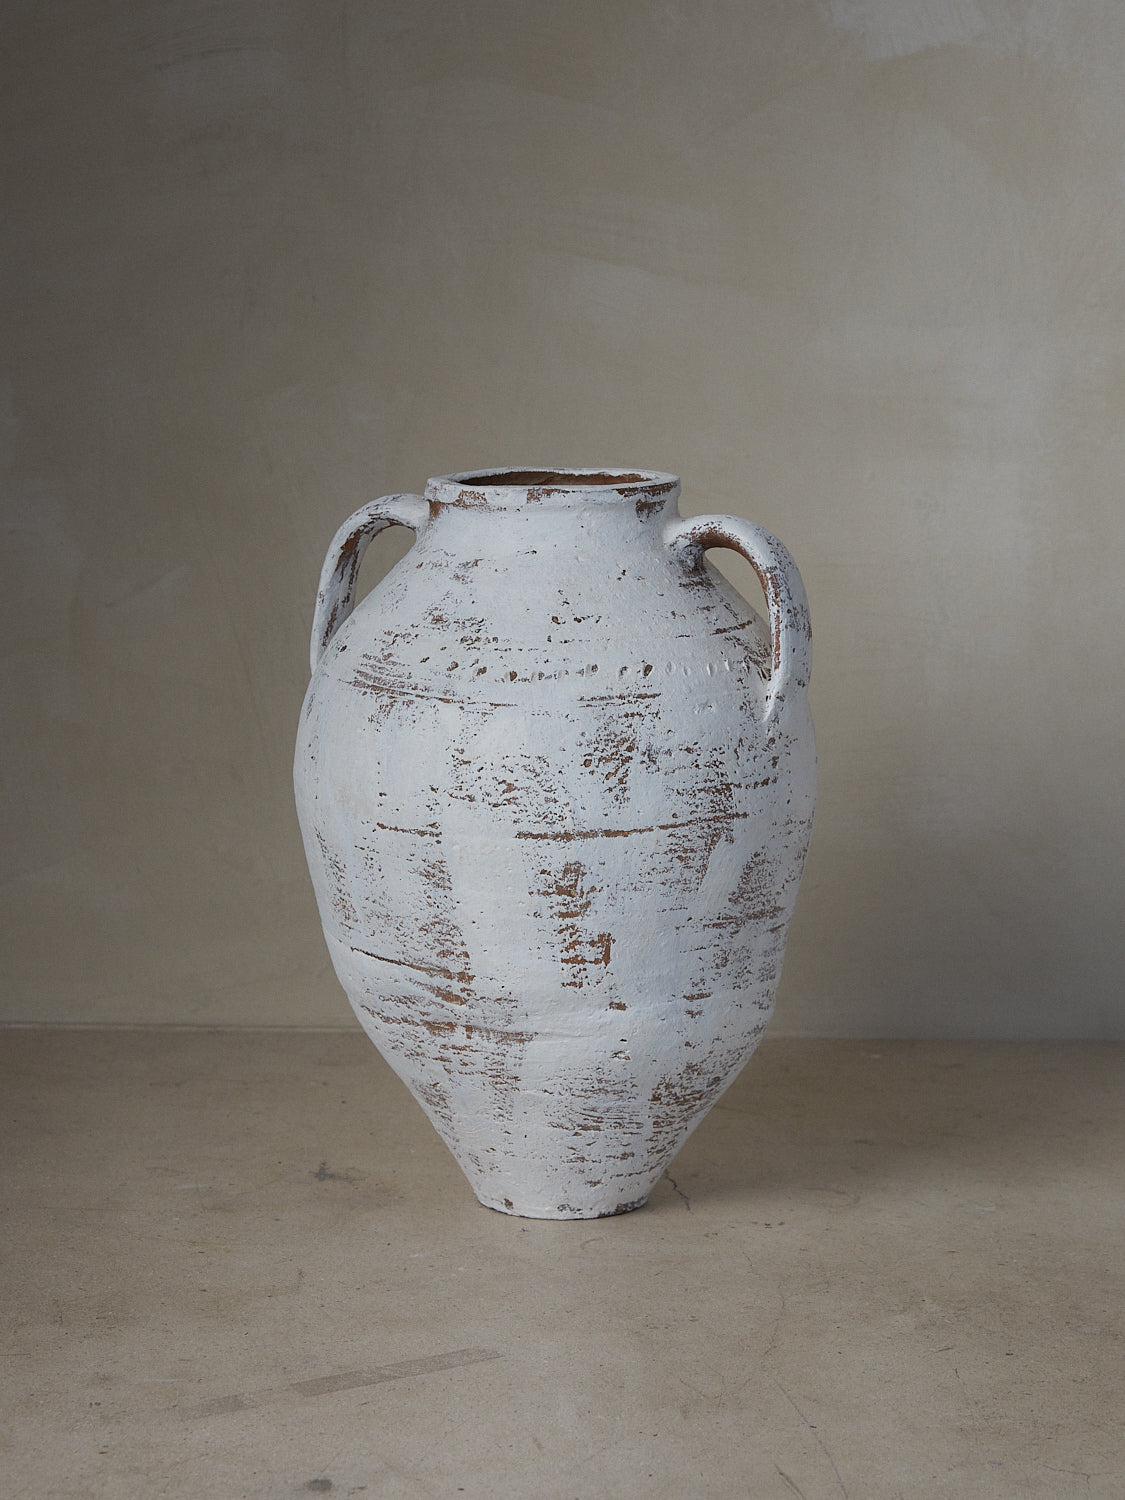 Vase Turque. Rare find. Large Turkish vessel with classical pitcher bodice and handles in aged white over terracotta clay. 